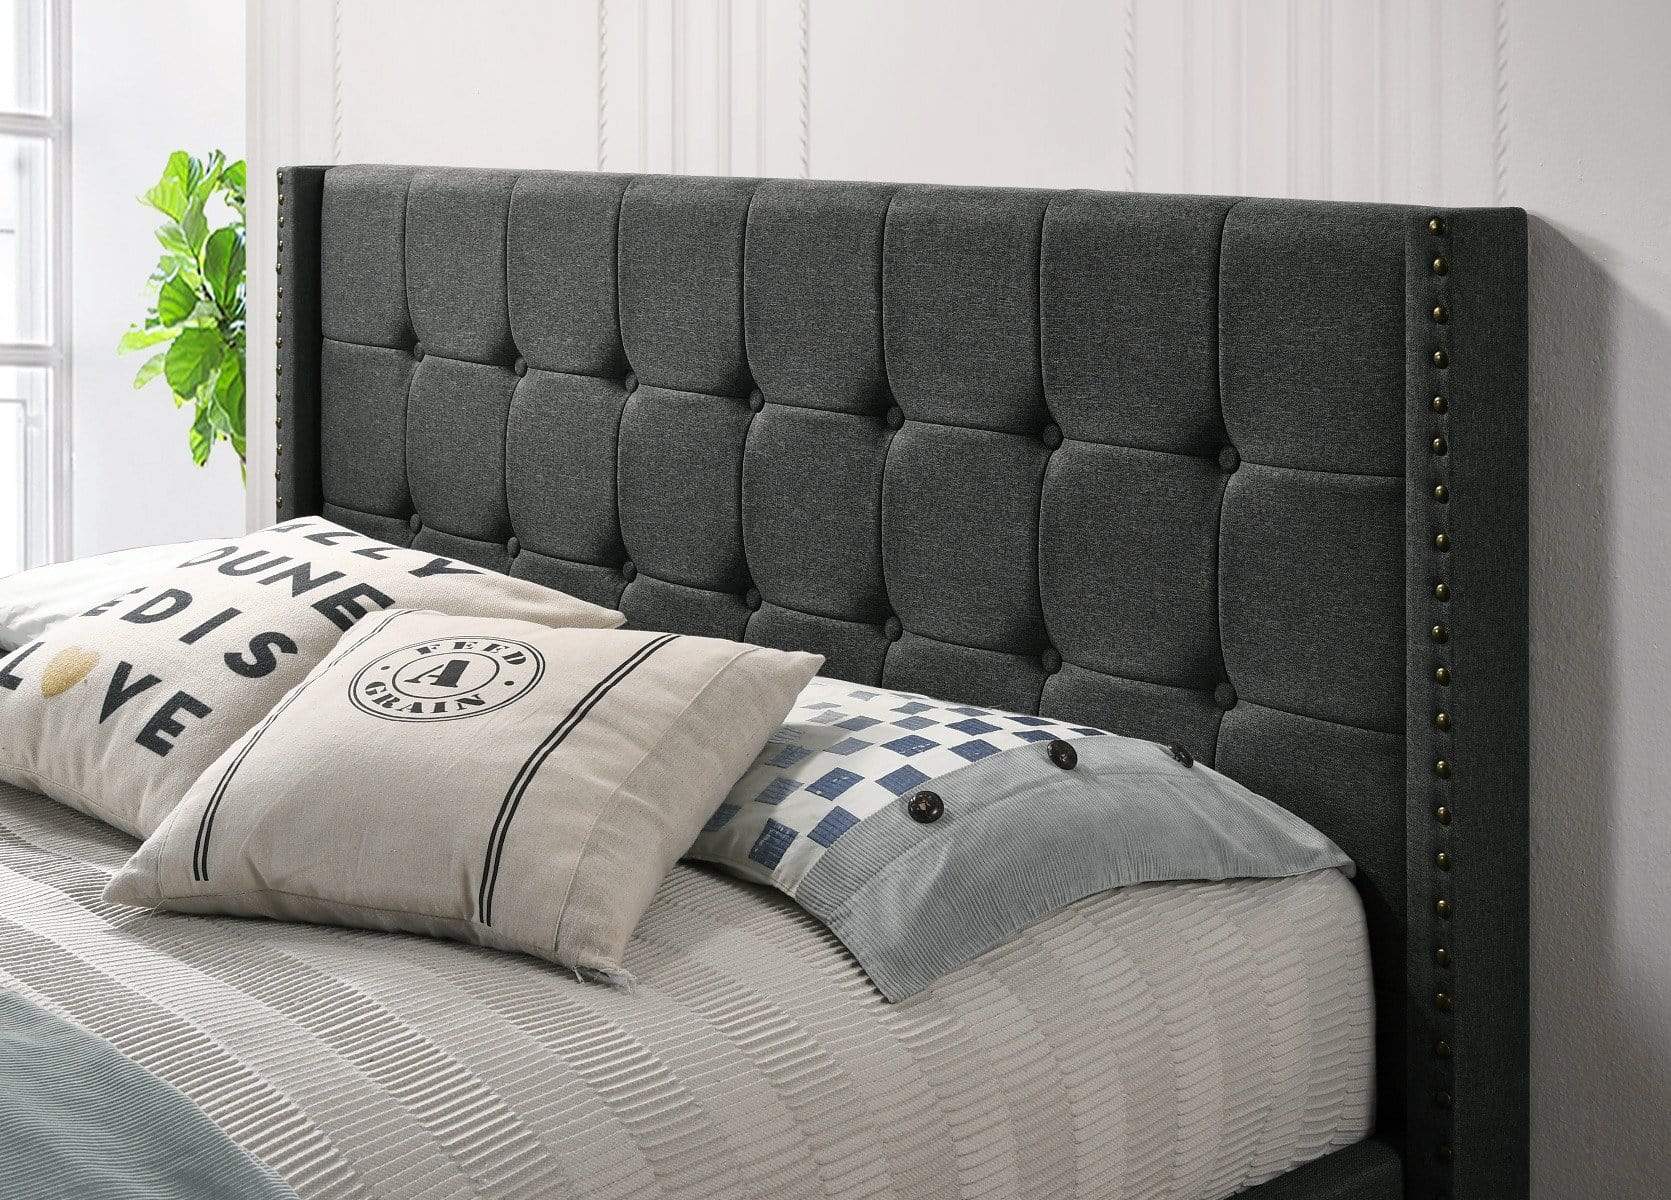 Queen Sized Winged Fabric Bed Frame with Gas Lift Storage in Charcoal - Newstart Furniture